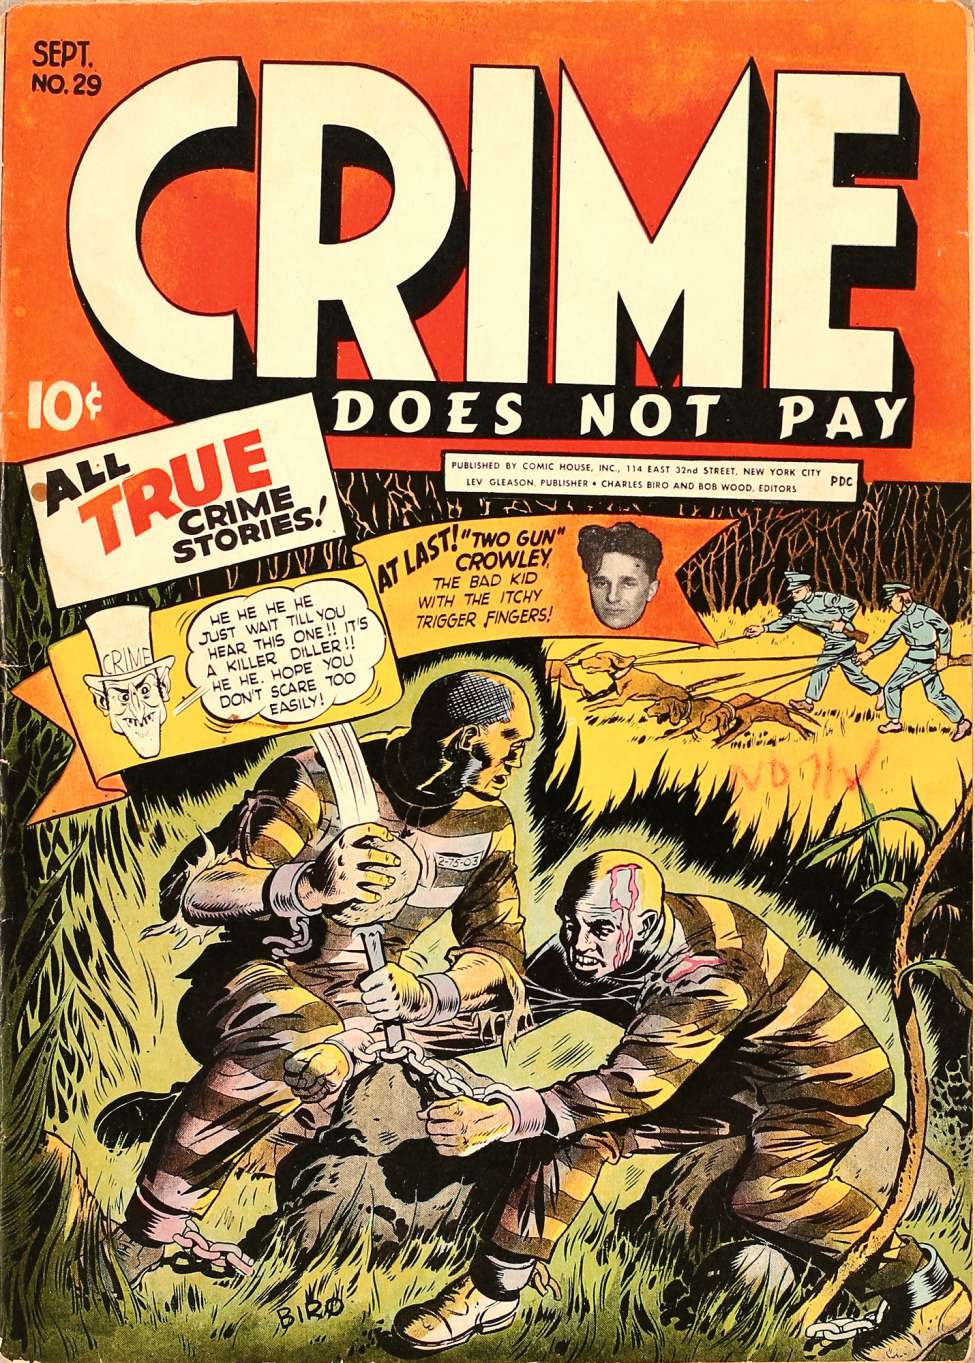 Book Cover For Crime Does Not Pay 29